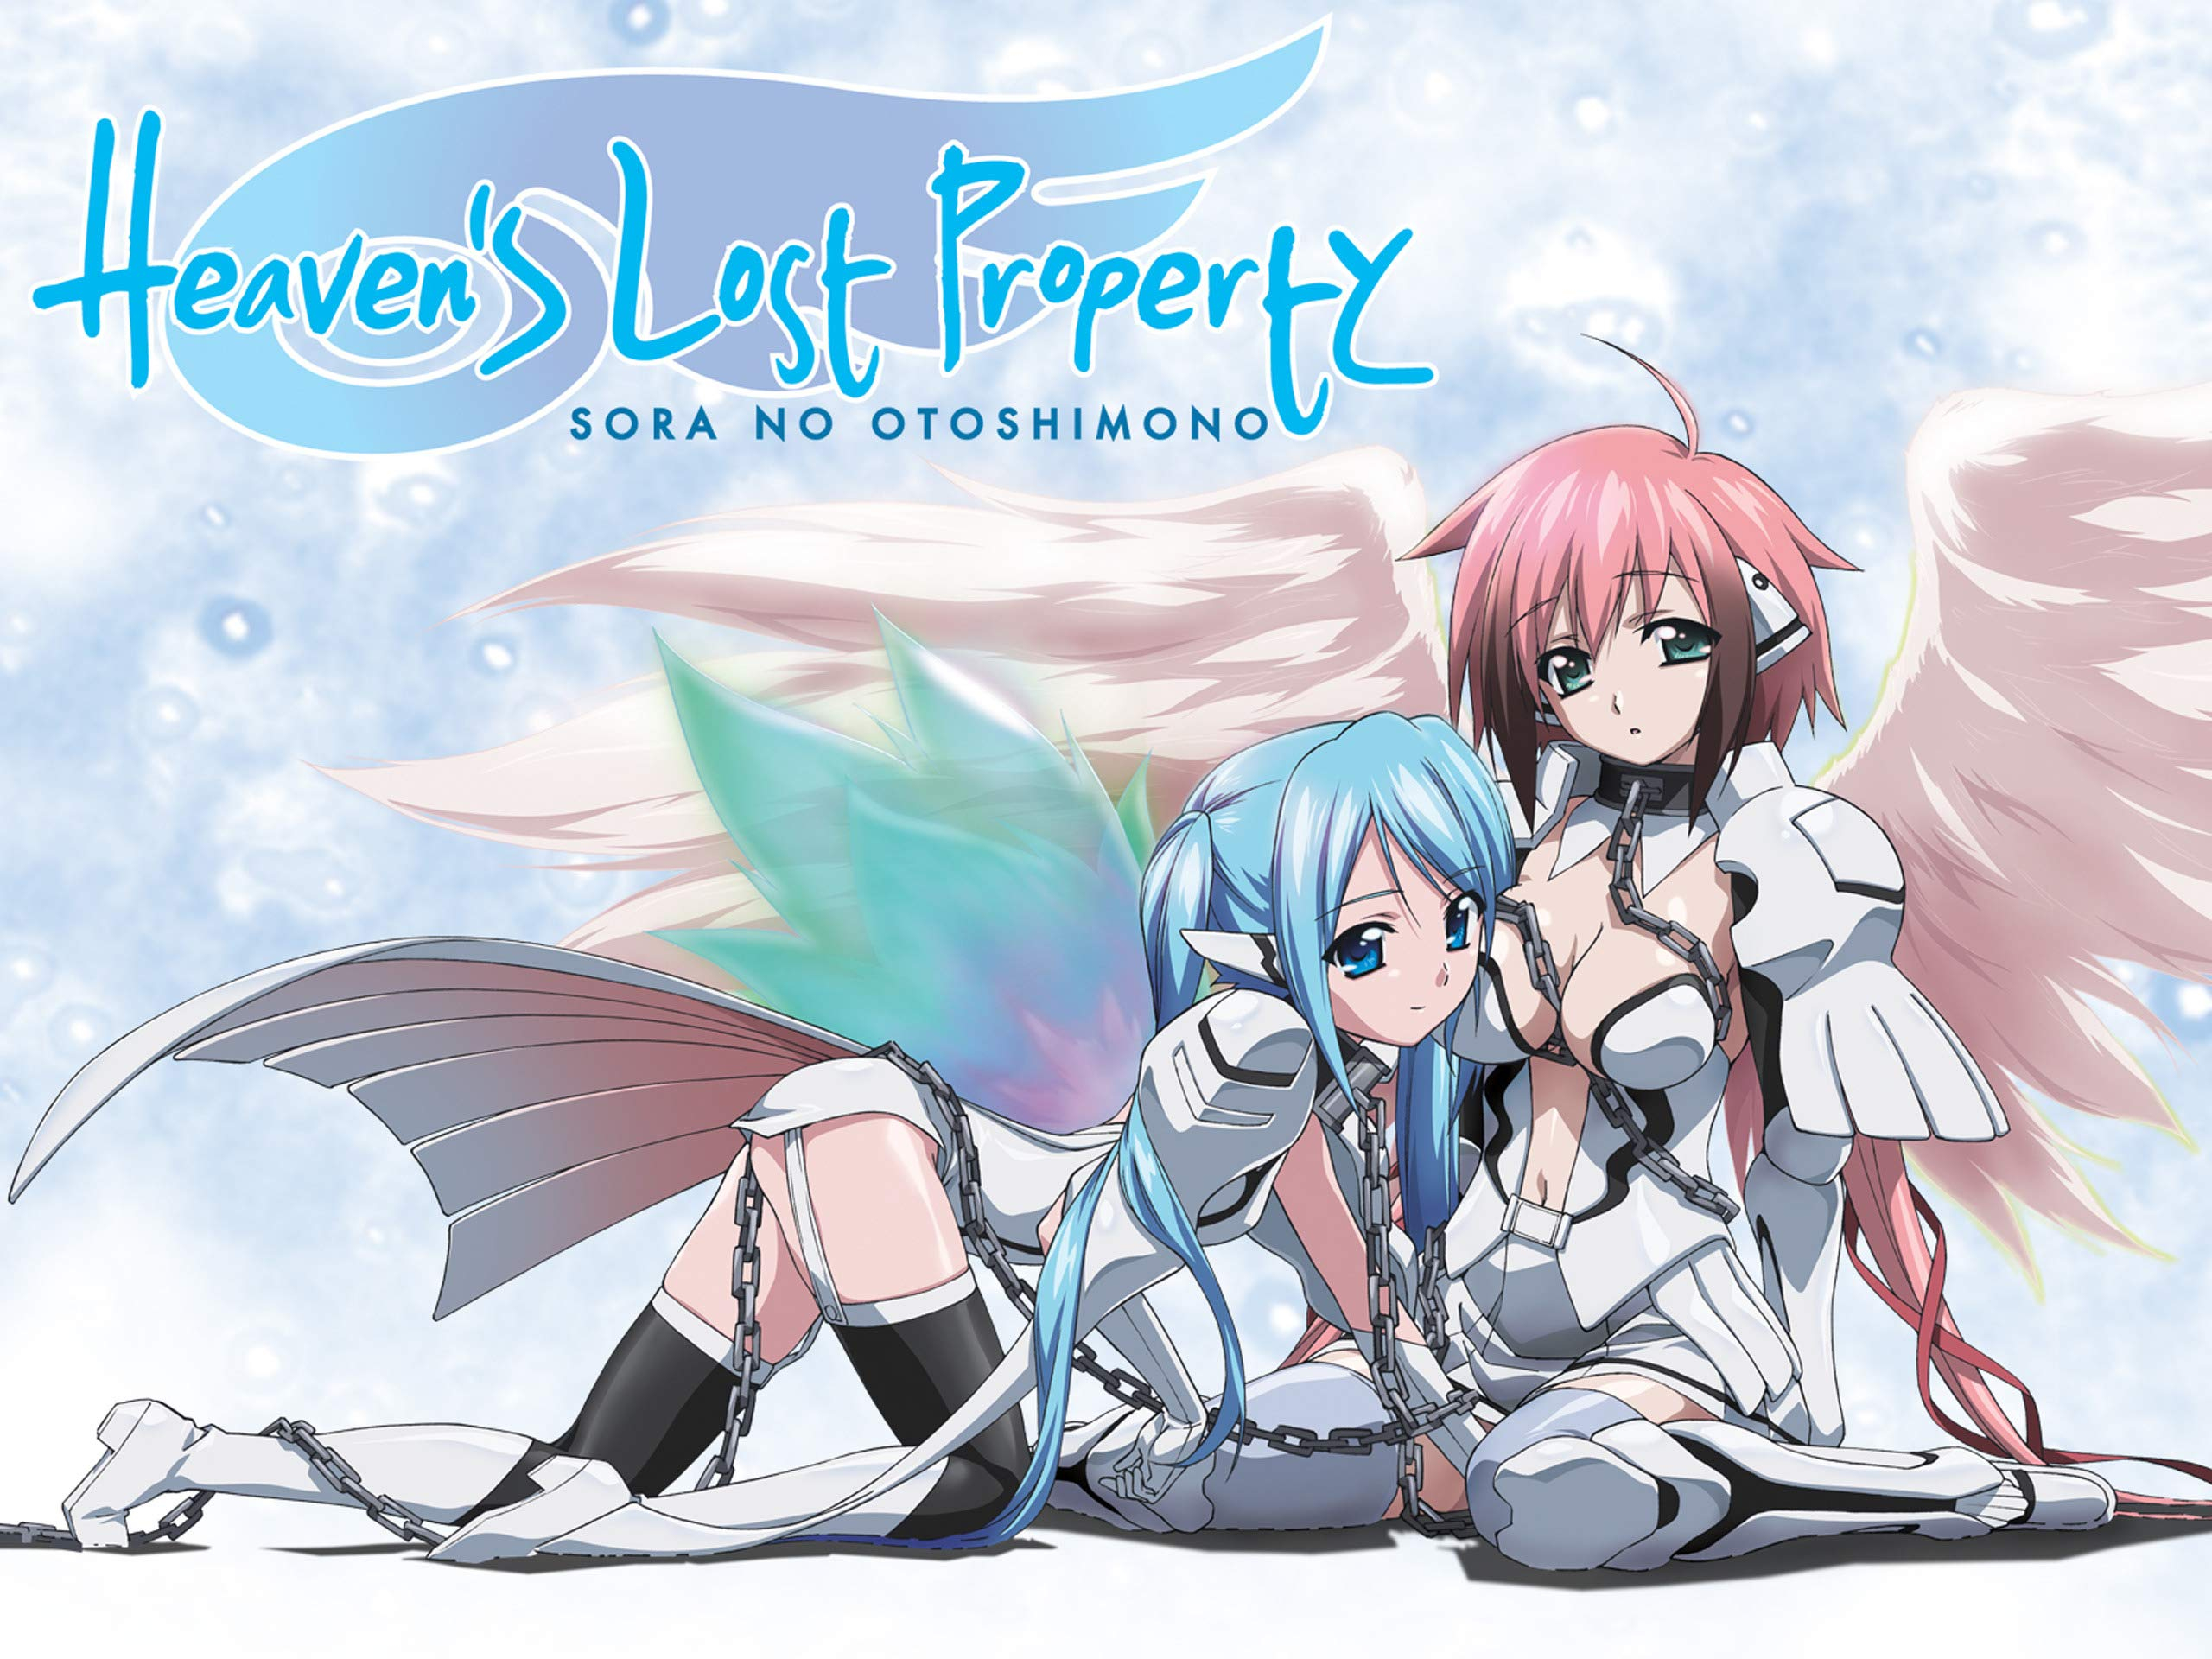 Lost Property of the Sky 2 (2010)